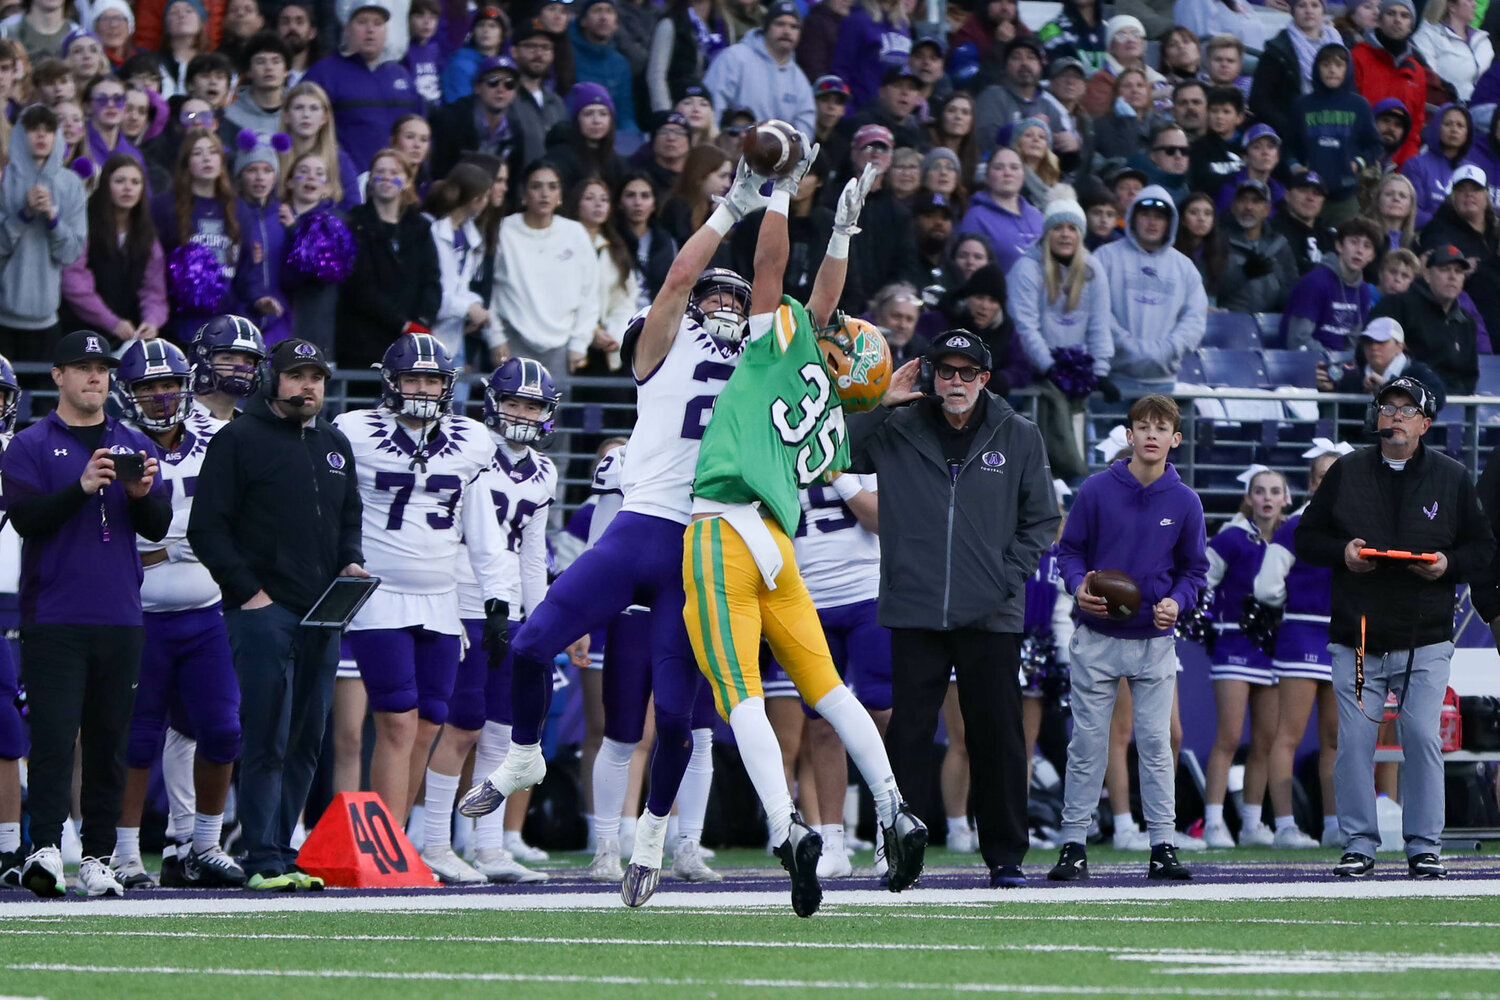 Tumwater's Kooper Clark defends a pass during a 60-30 loss to Anacortes Dec. 2. at Husky Stadium.